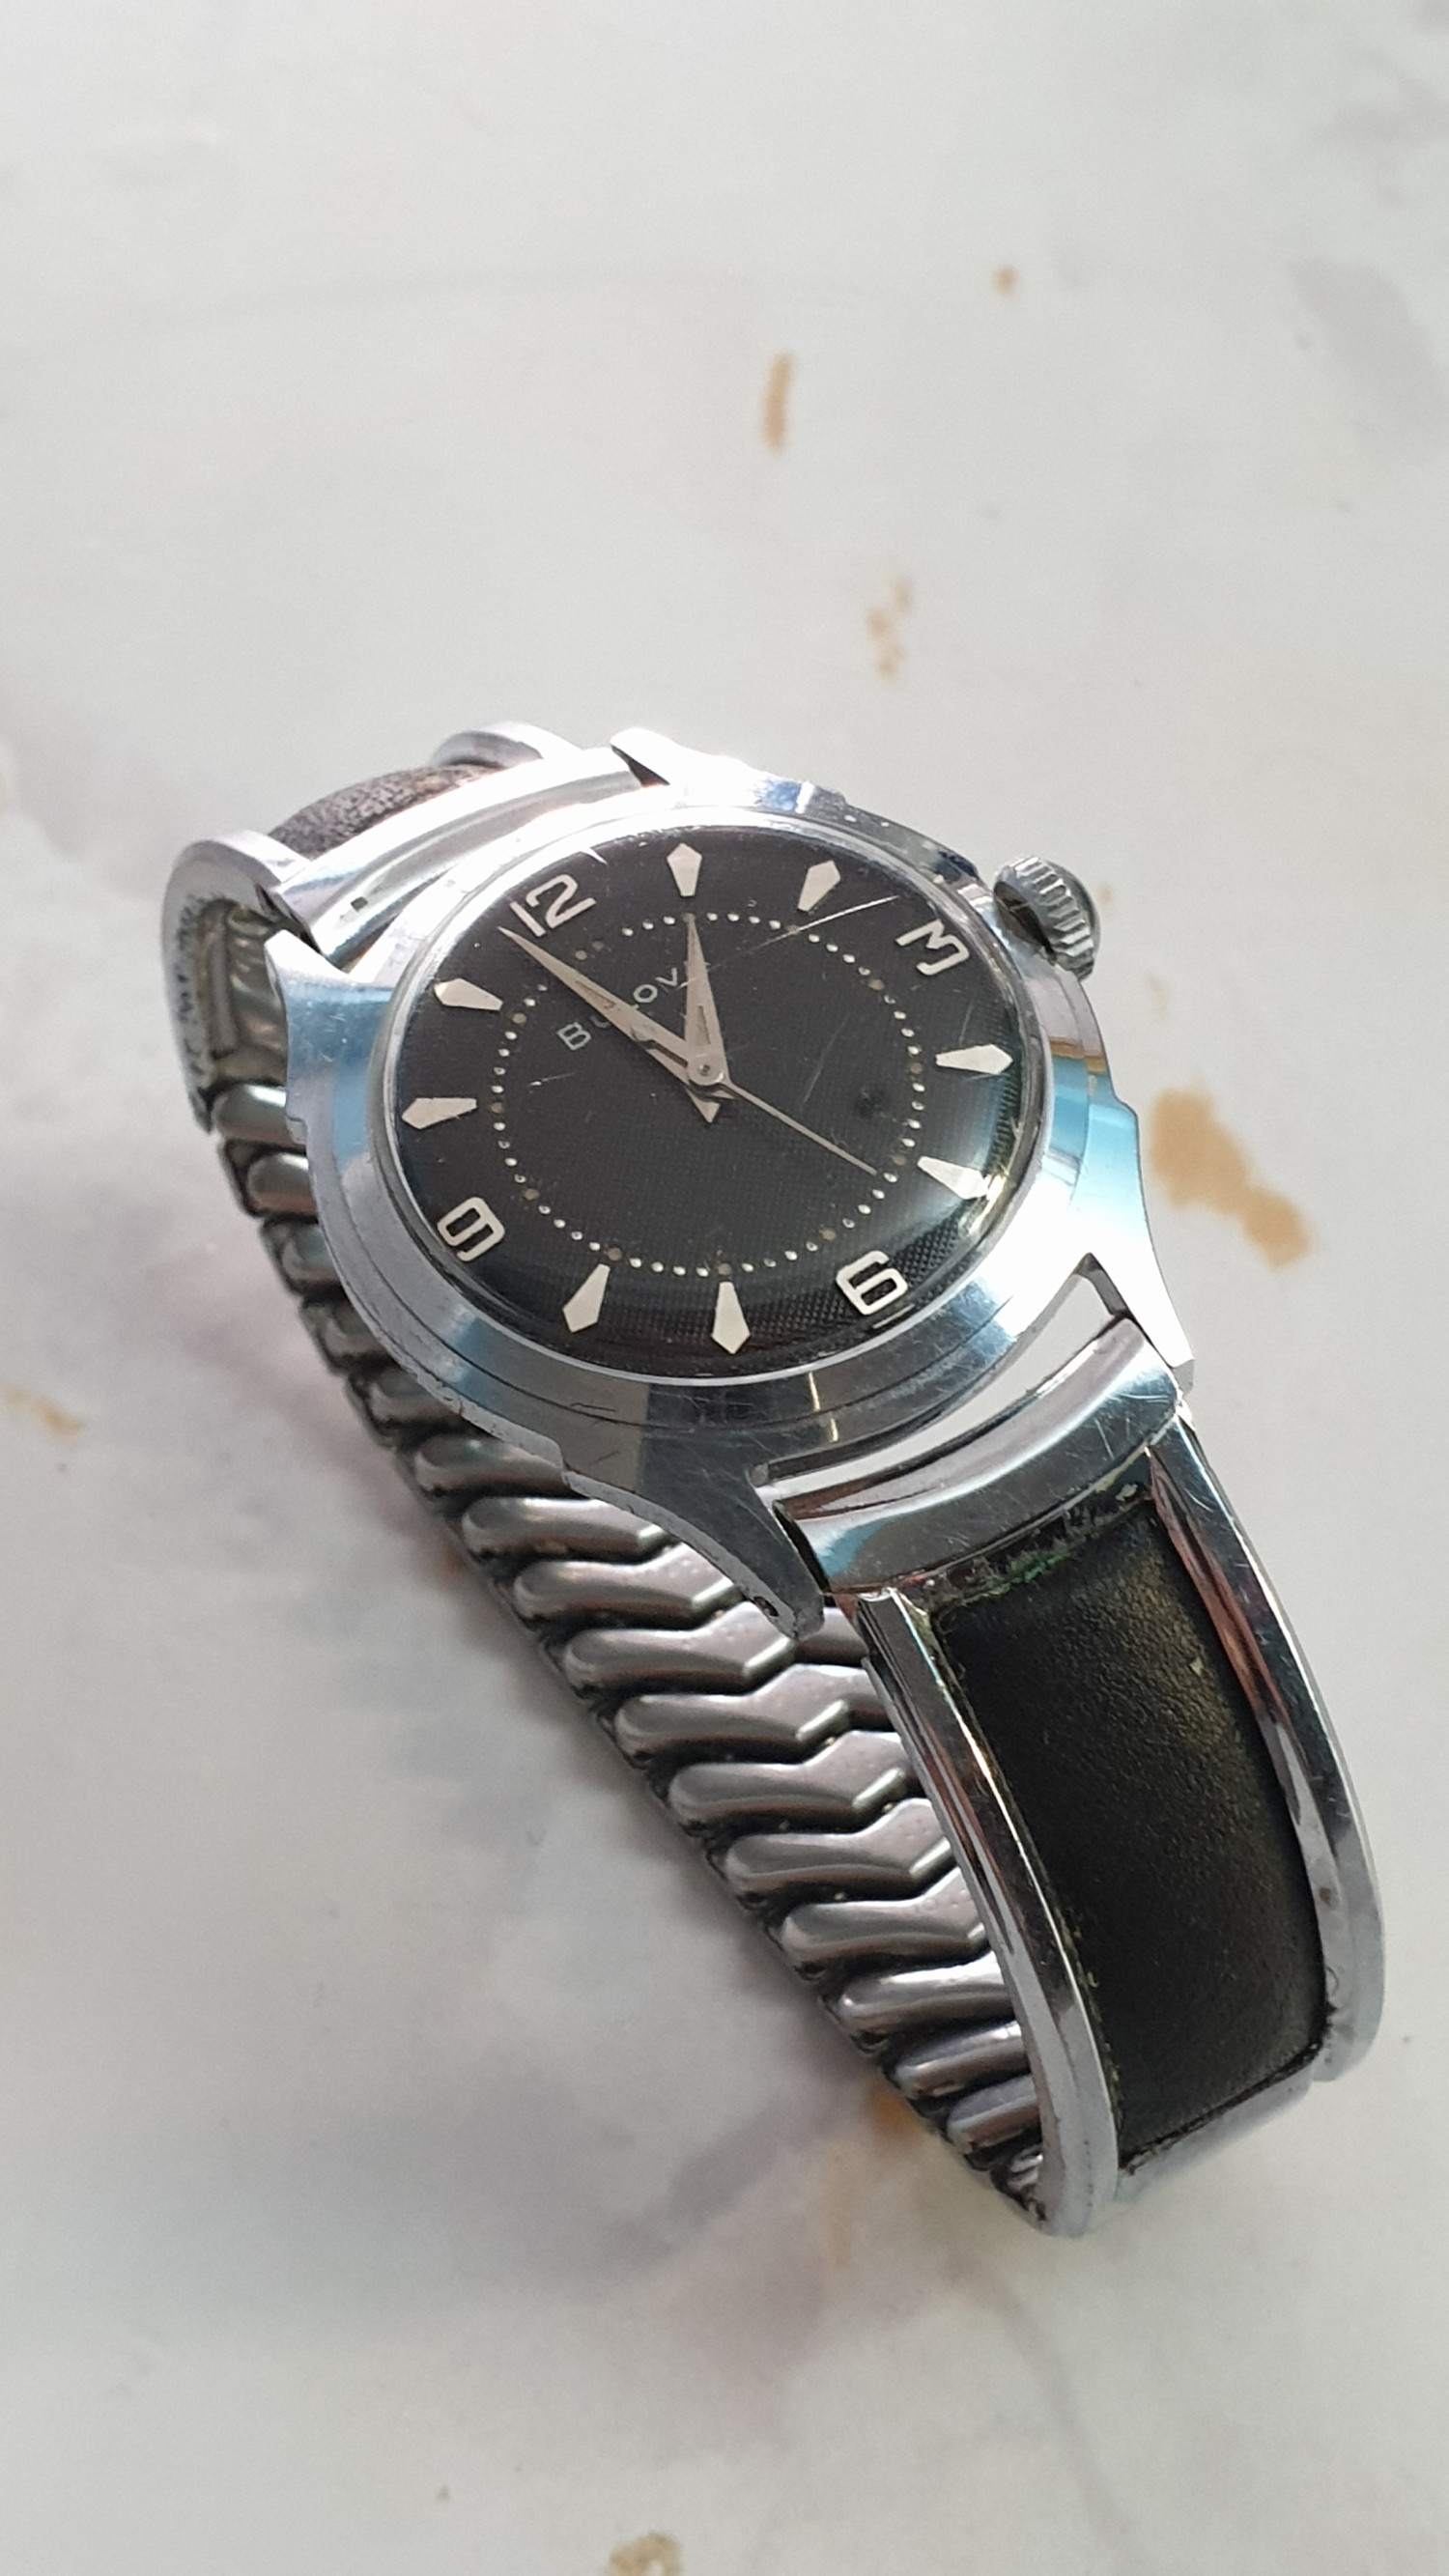 BULOVA MANUAL WIND WRISTWATCH WITH BLACK WAFFLE/HONEYCOMB DIAL IN CHROME PLATE CASE WITH ORIGINAL - Image 3 of 12